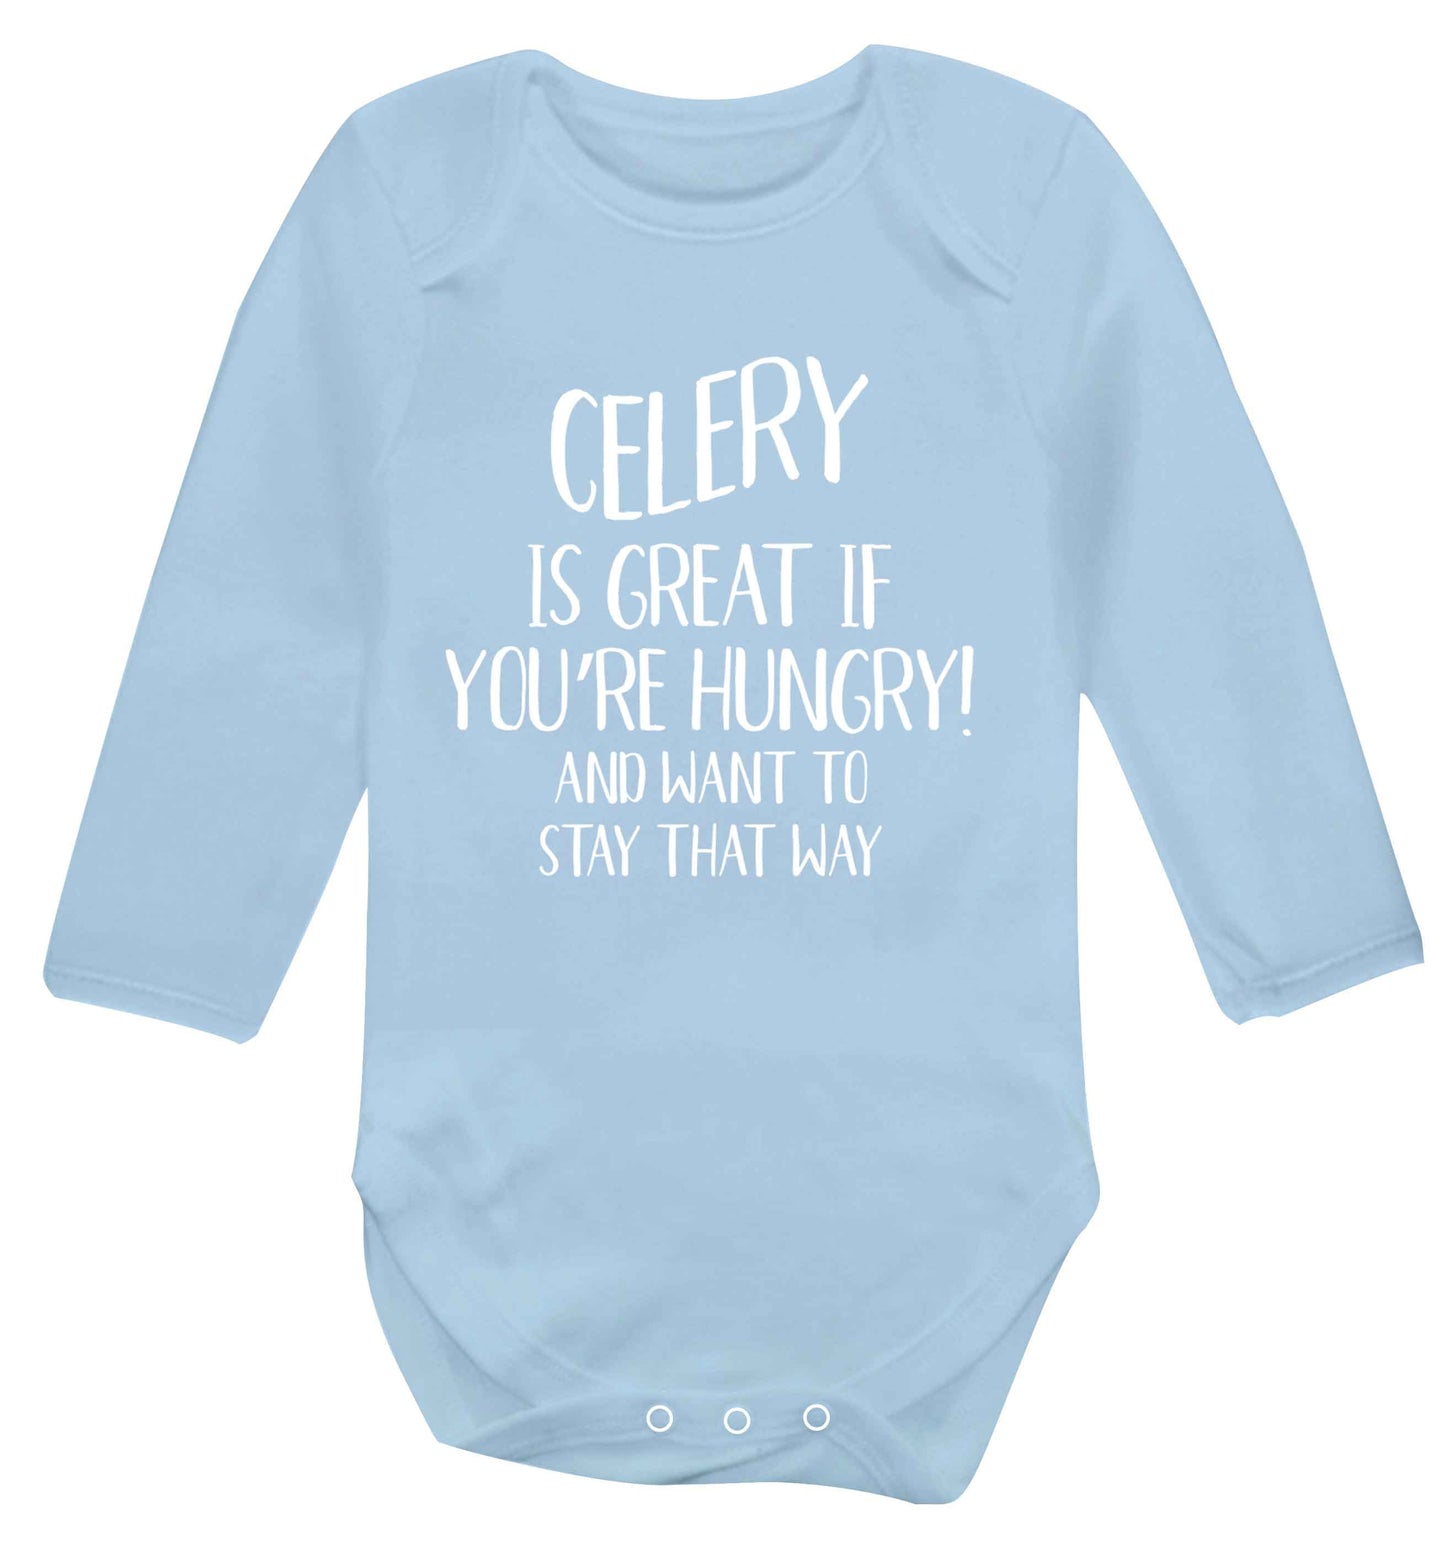 Cellery is great when you're hungry and want to stay that way Baby Vest long sleeved pale blue 6-12 months